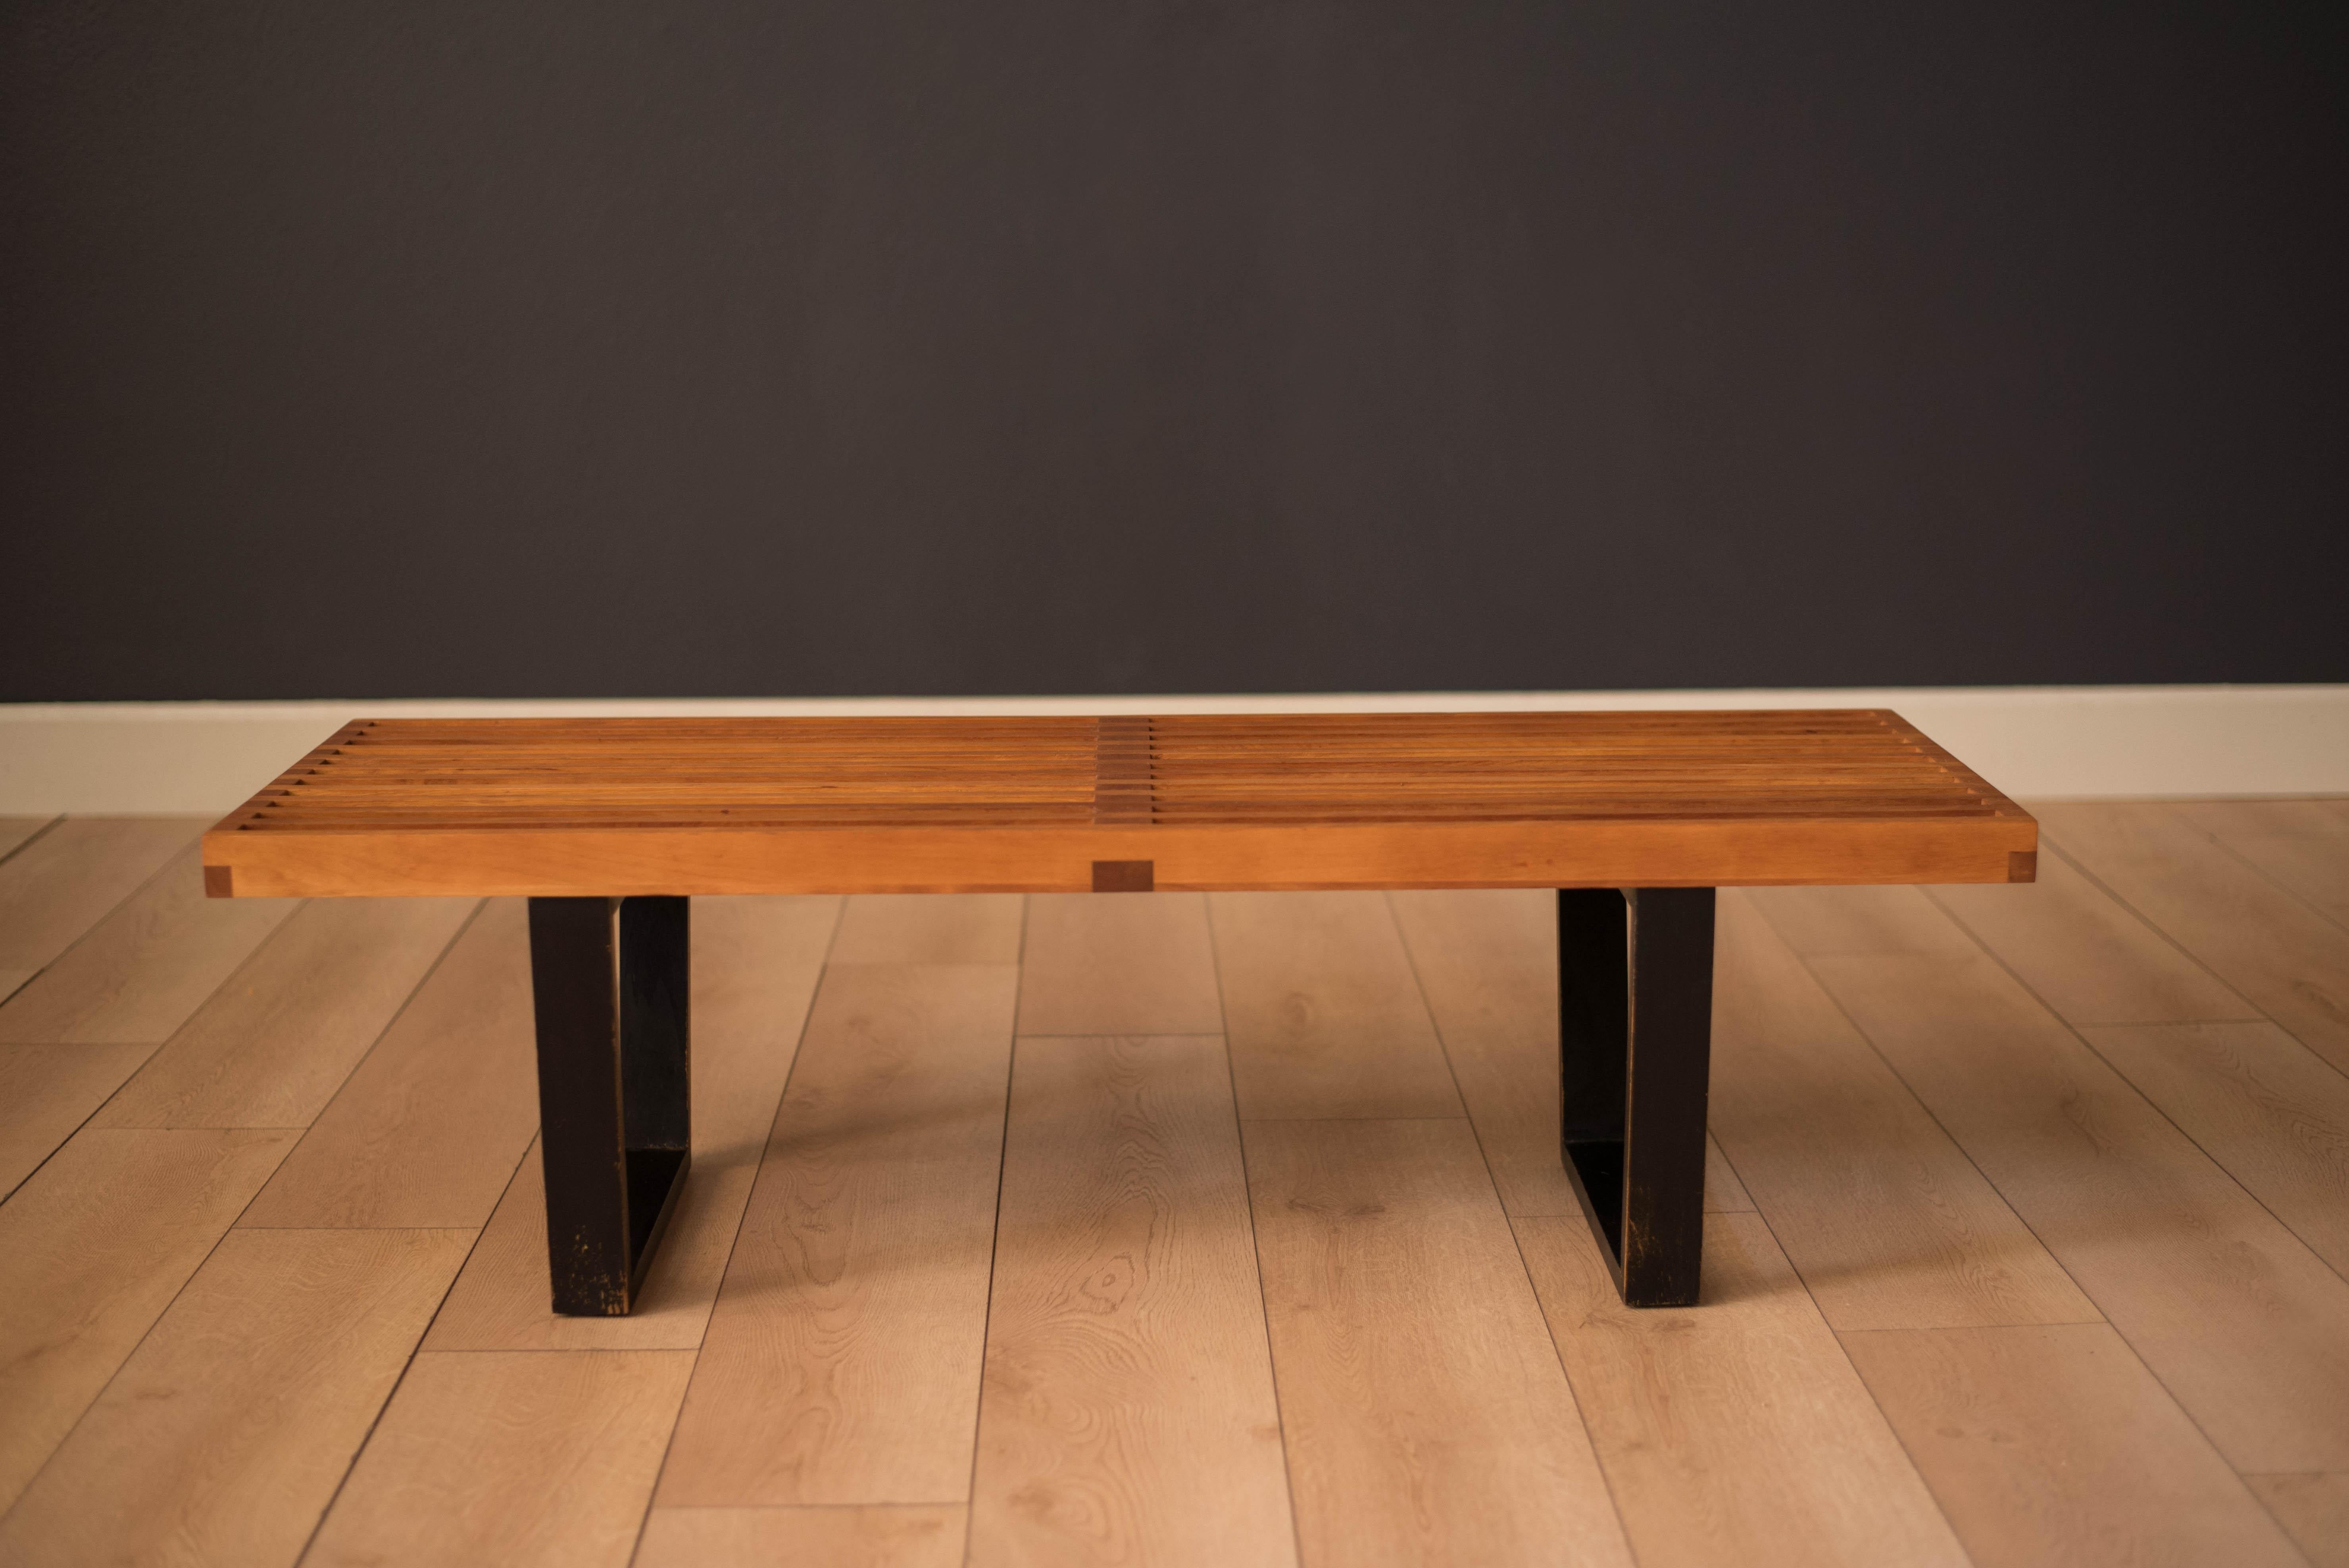 Mid-Century Modern table bench designed by George Nelson for Herman Miller circa 1950s. Originally intended as a platform base for the Basic Cabinet Series, this versatile piece has many uses and can function as a living room coffee table, entryway